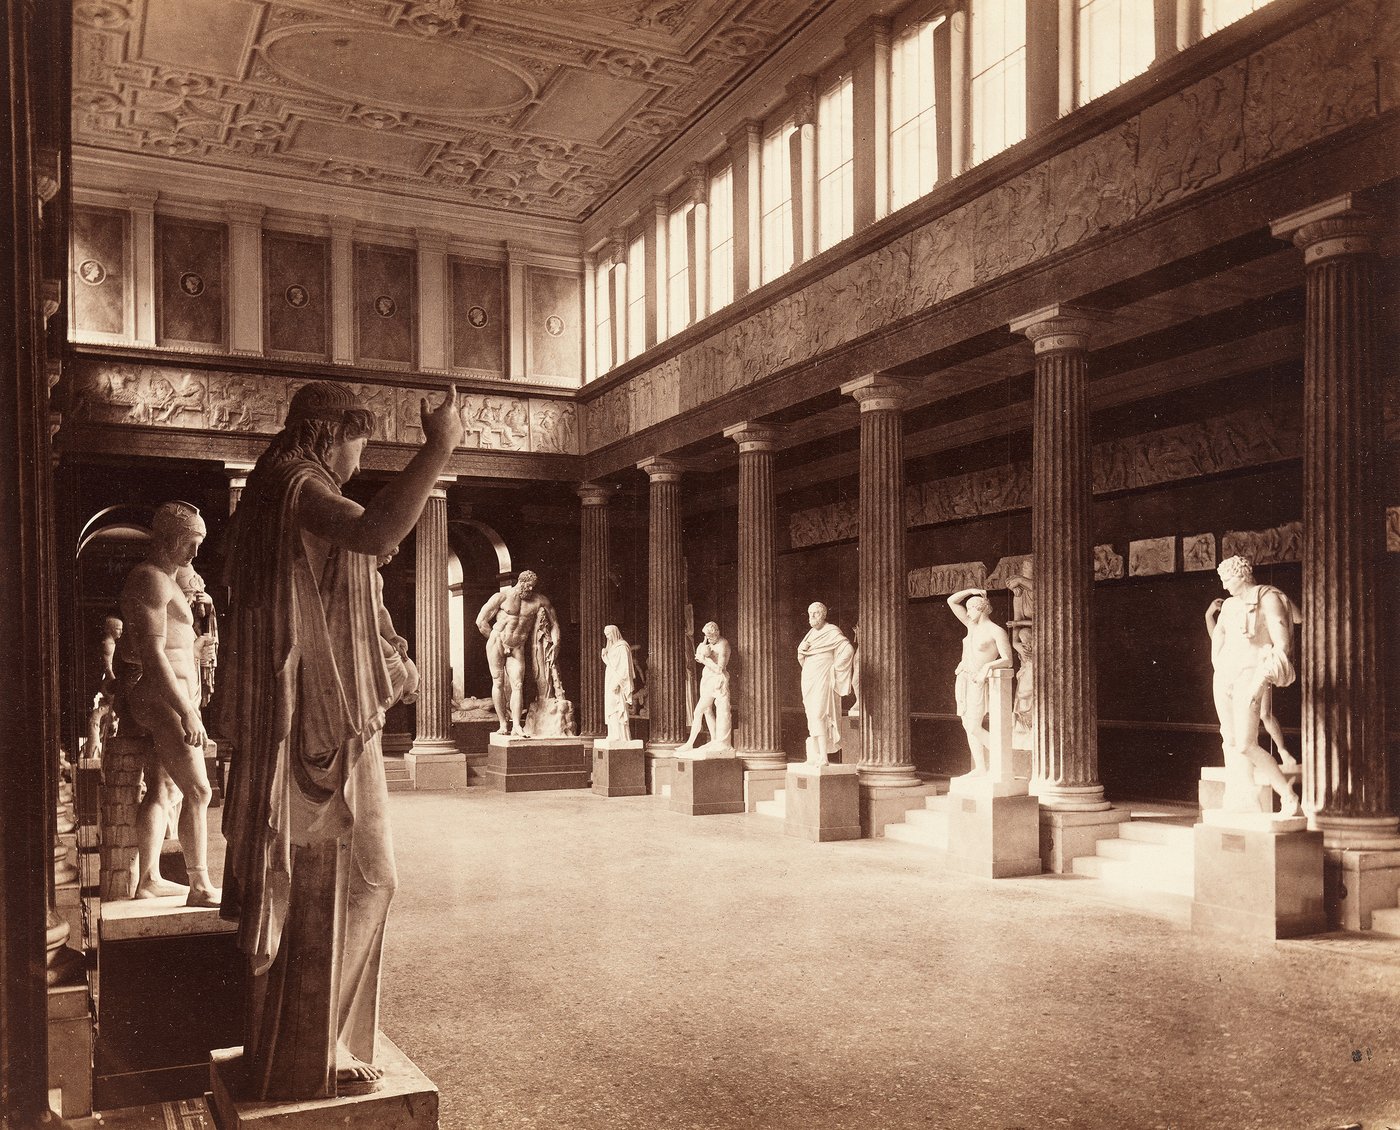 A historical photograph in sepia colors showing a large room with a row of columns between which are Greek sculptures on pedestals, above the columns a picture frieze and high upper windows through which light shines in